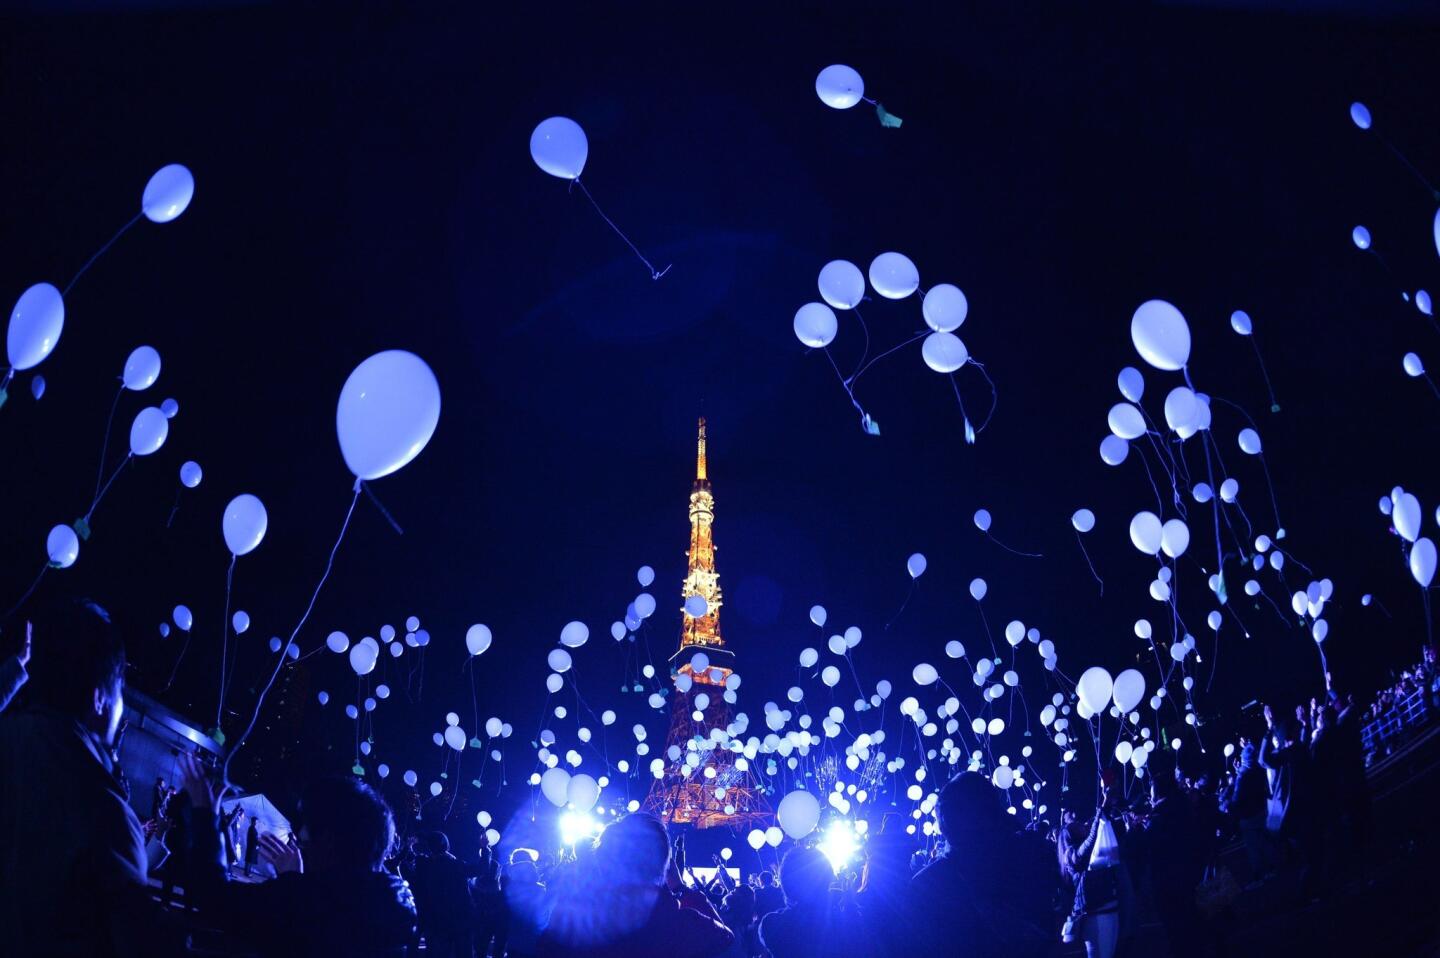 New Year's in Japan